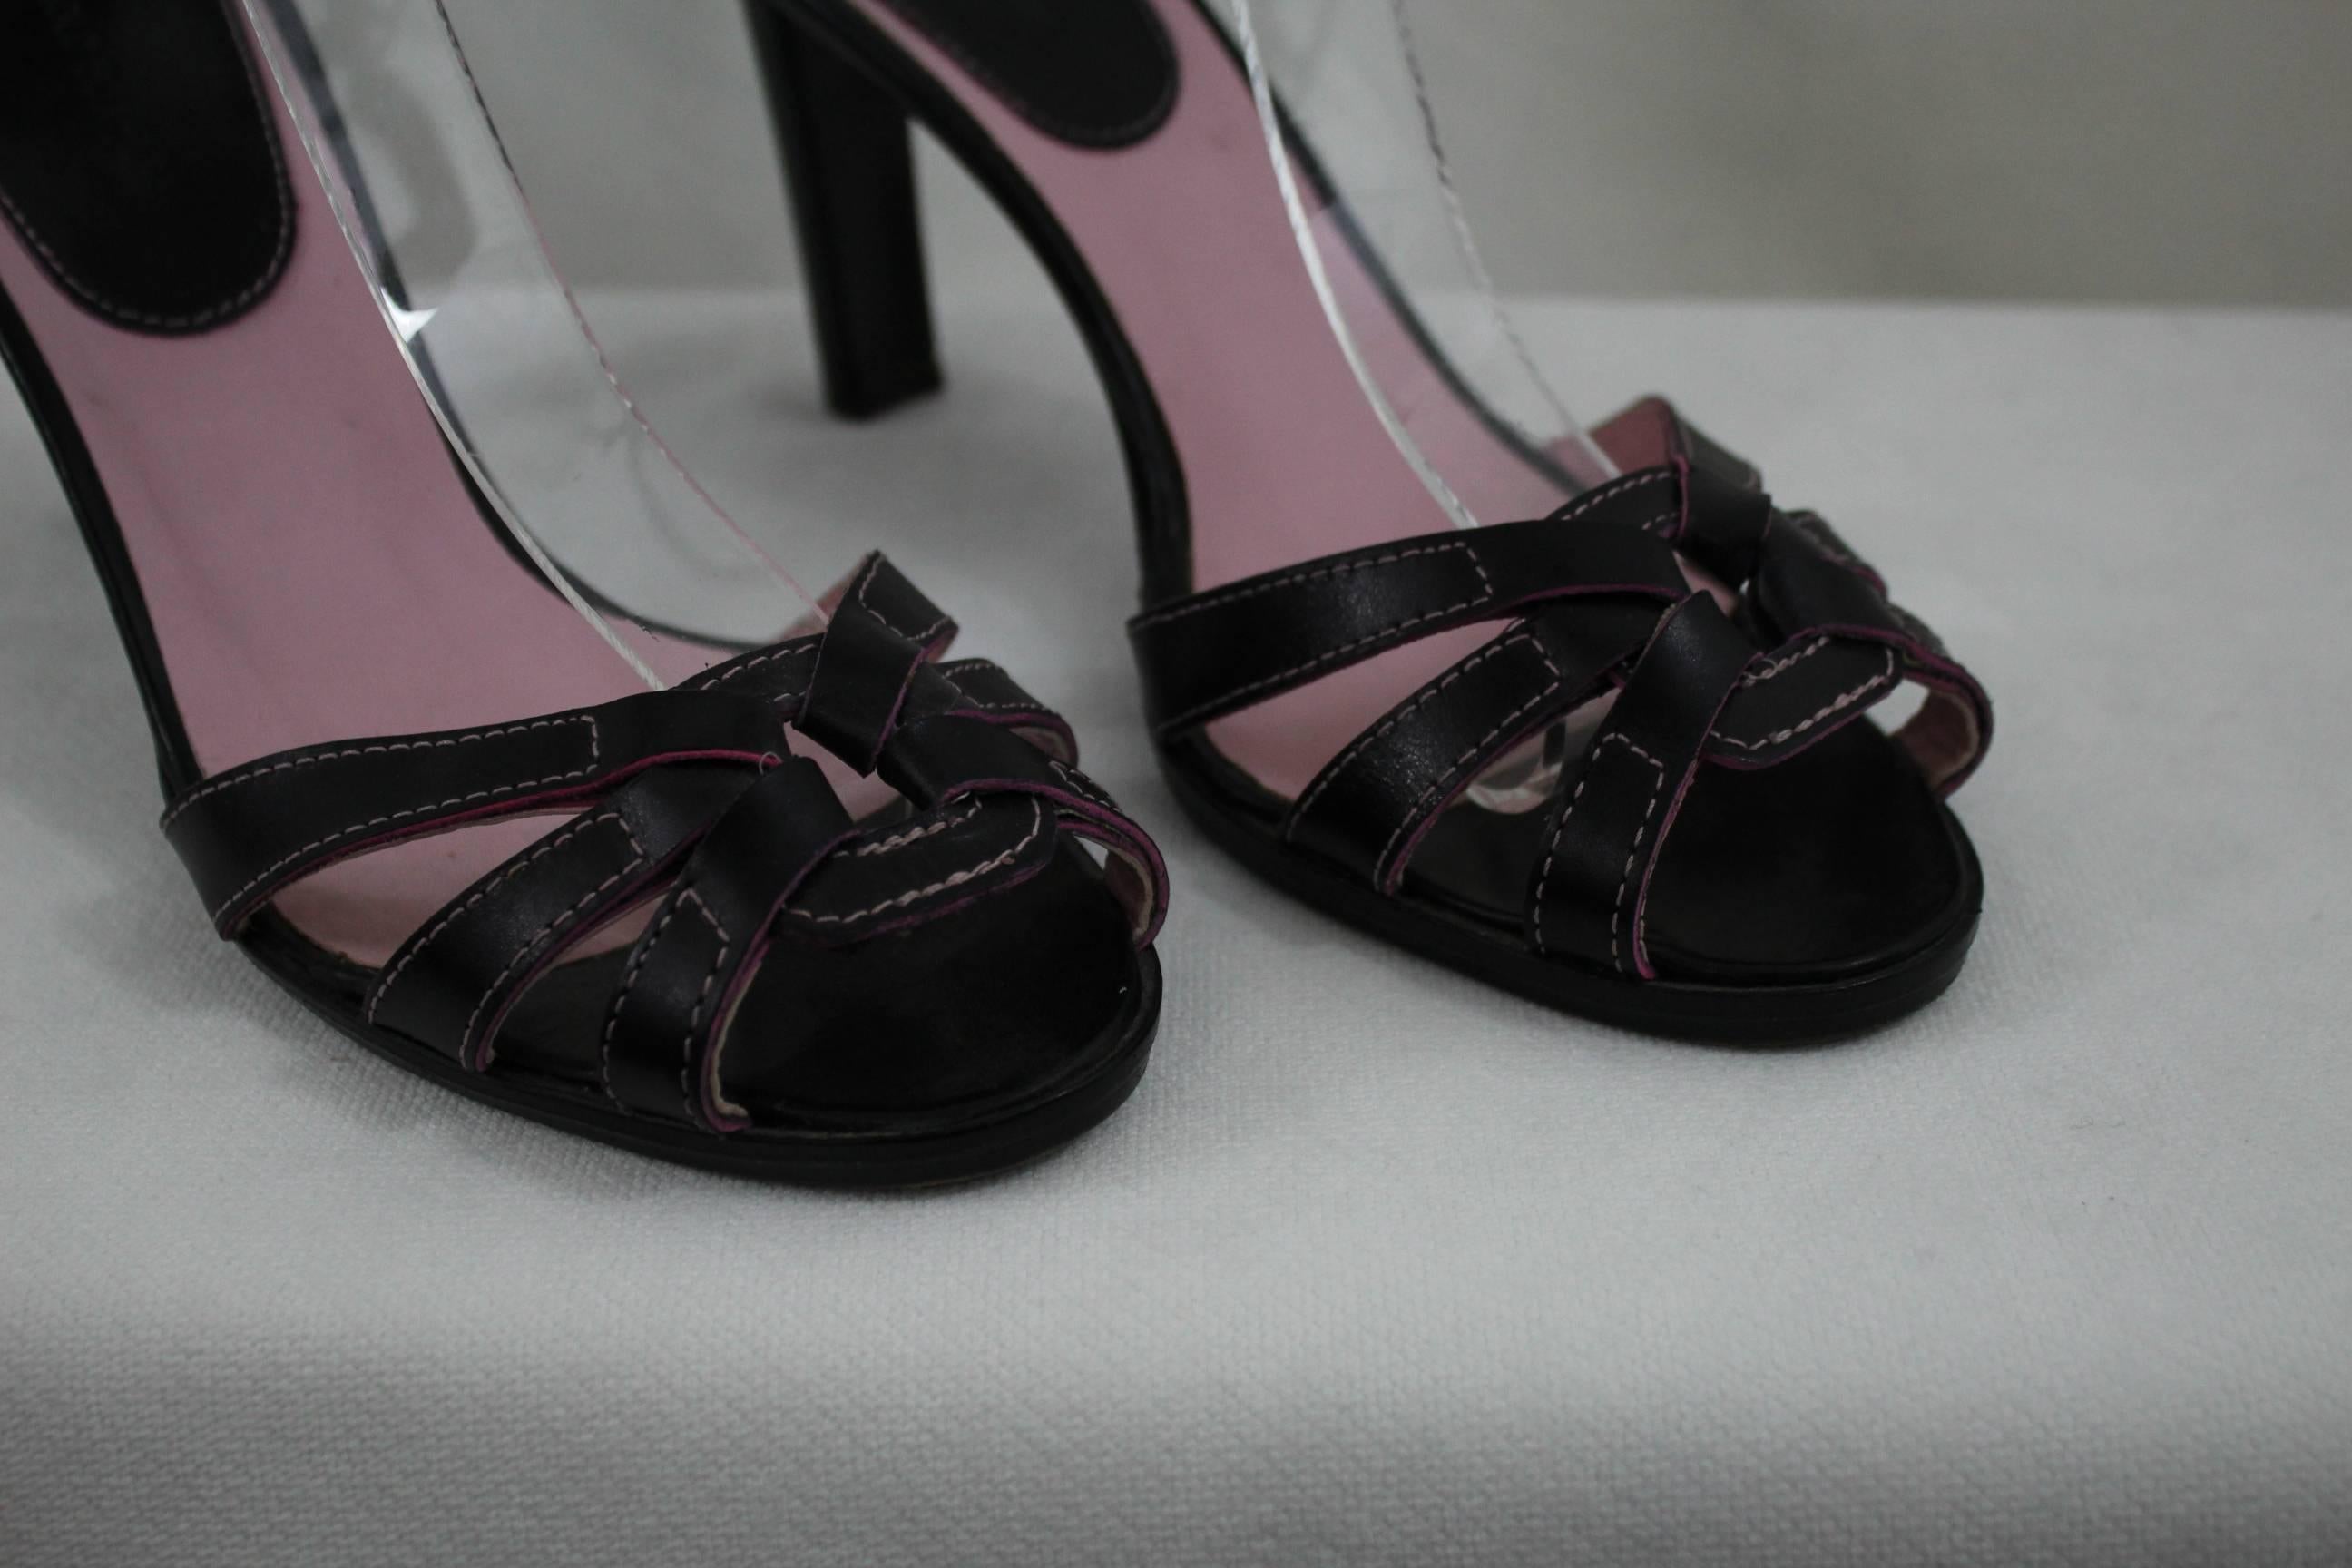 Women's Manolo Blahnik Pink and Black leather Sandals. Size 8 US (38 1/2 EU) For Sale